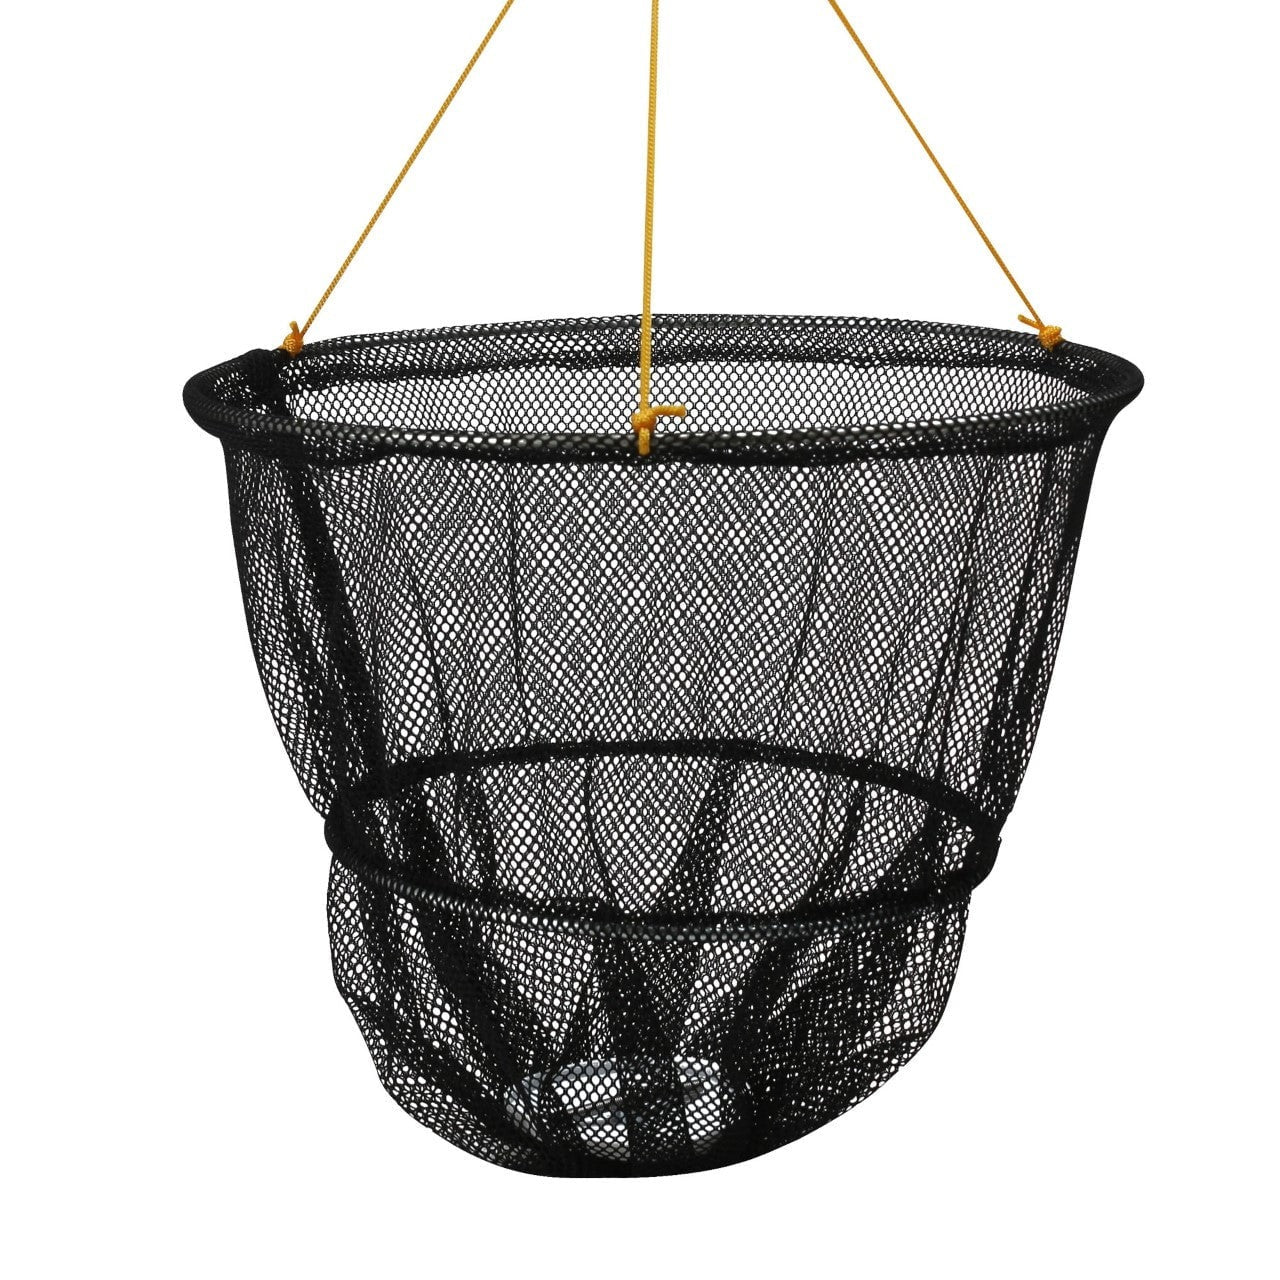 Amos Collapsible Crayfish & Crab Net 60 x 30 cm Trap With Bait Pocket